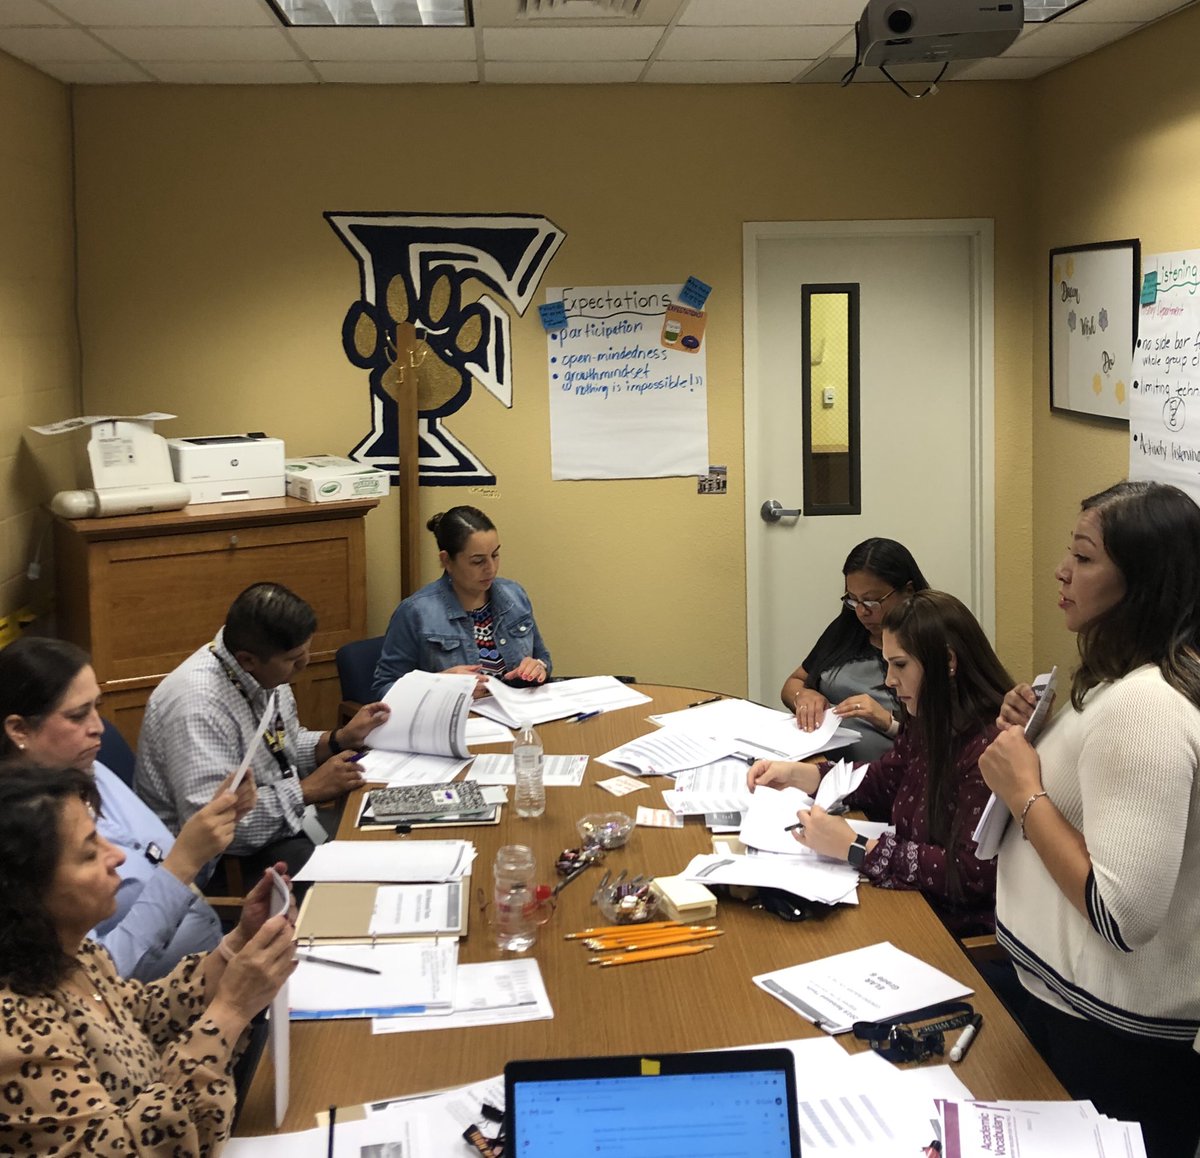 #ELAR PLC- “Alone we can do so little; together we can do so much!” #ContentBuilder @MGonzal79927 @VamosVijil @StaceyN94459733 @RonnieF17171355 @letty_b14